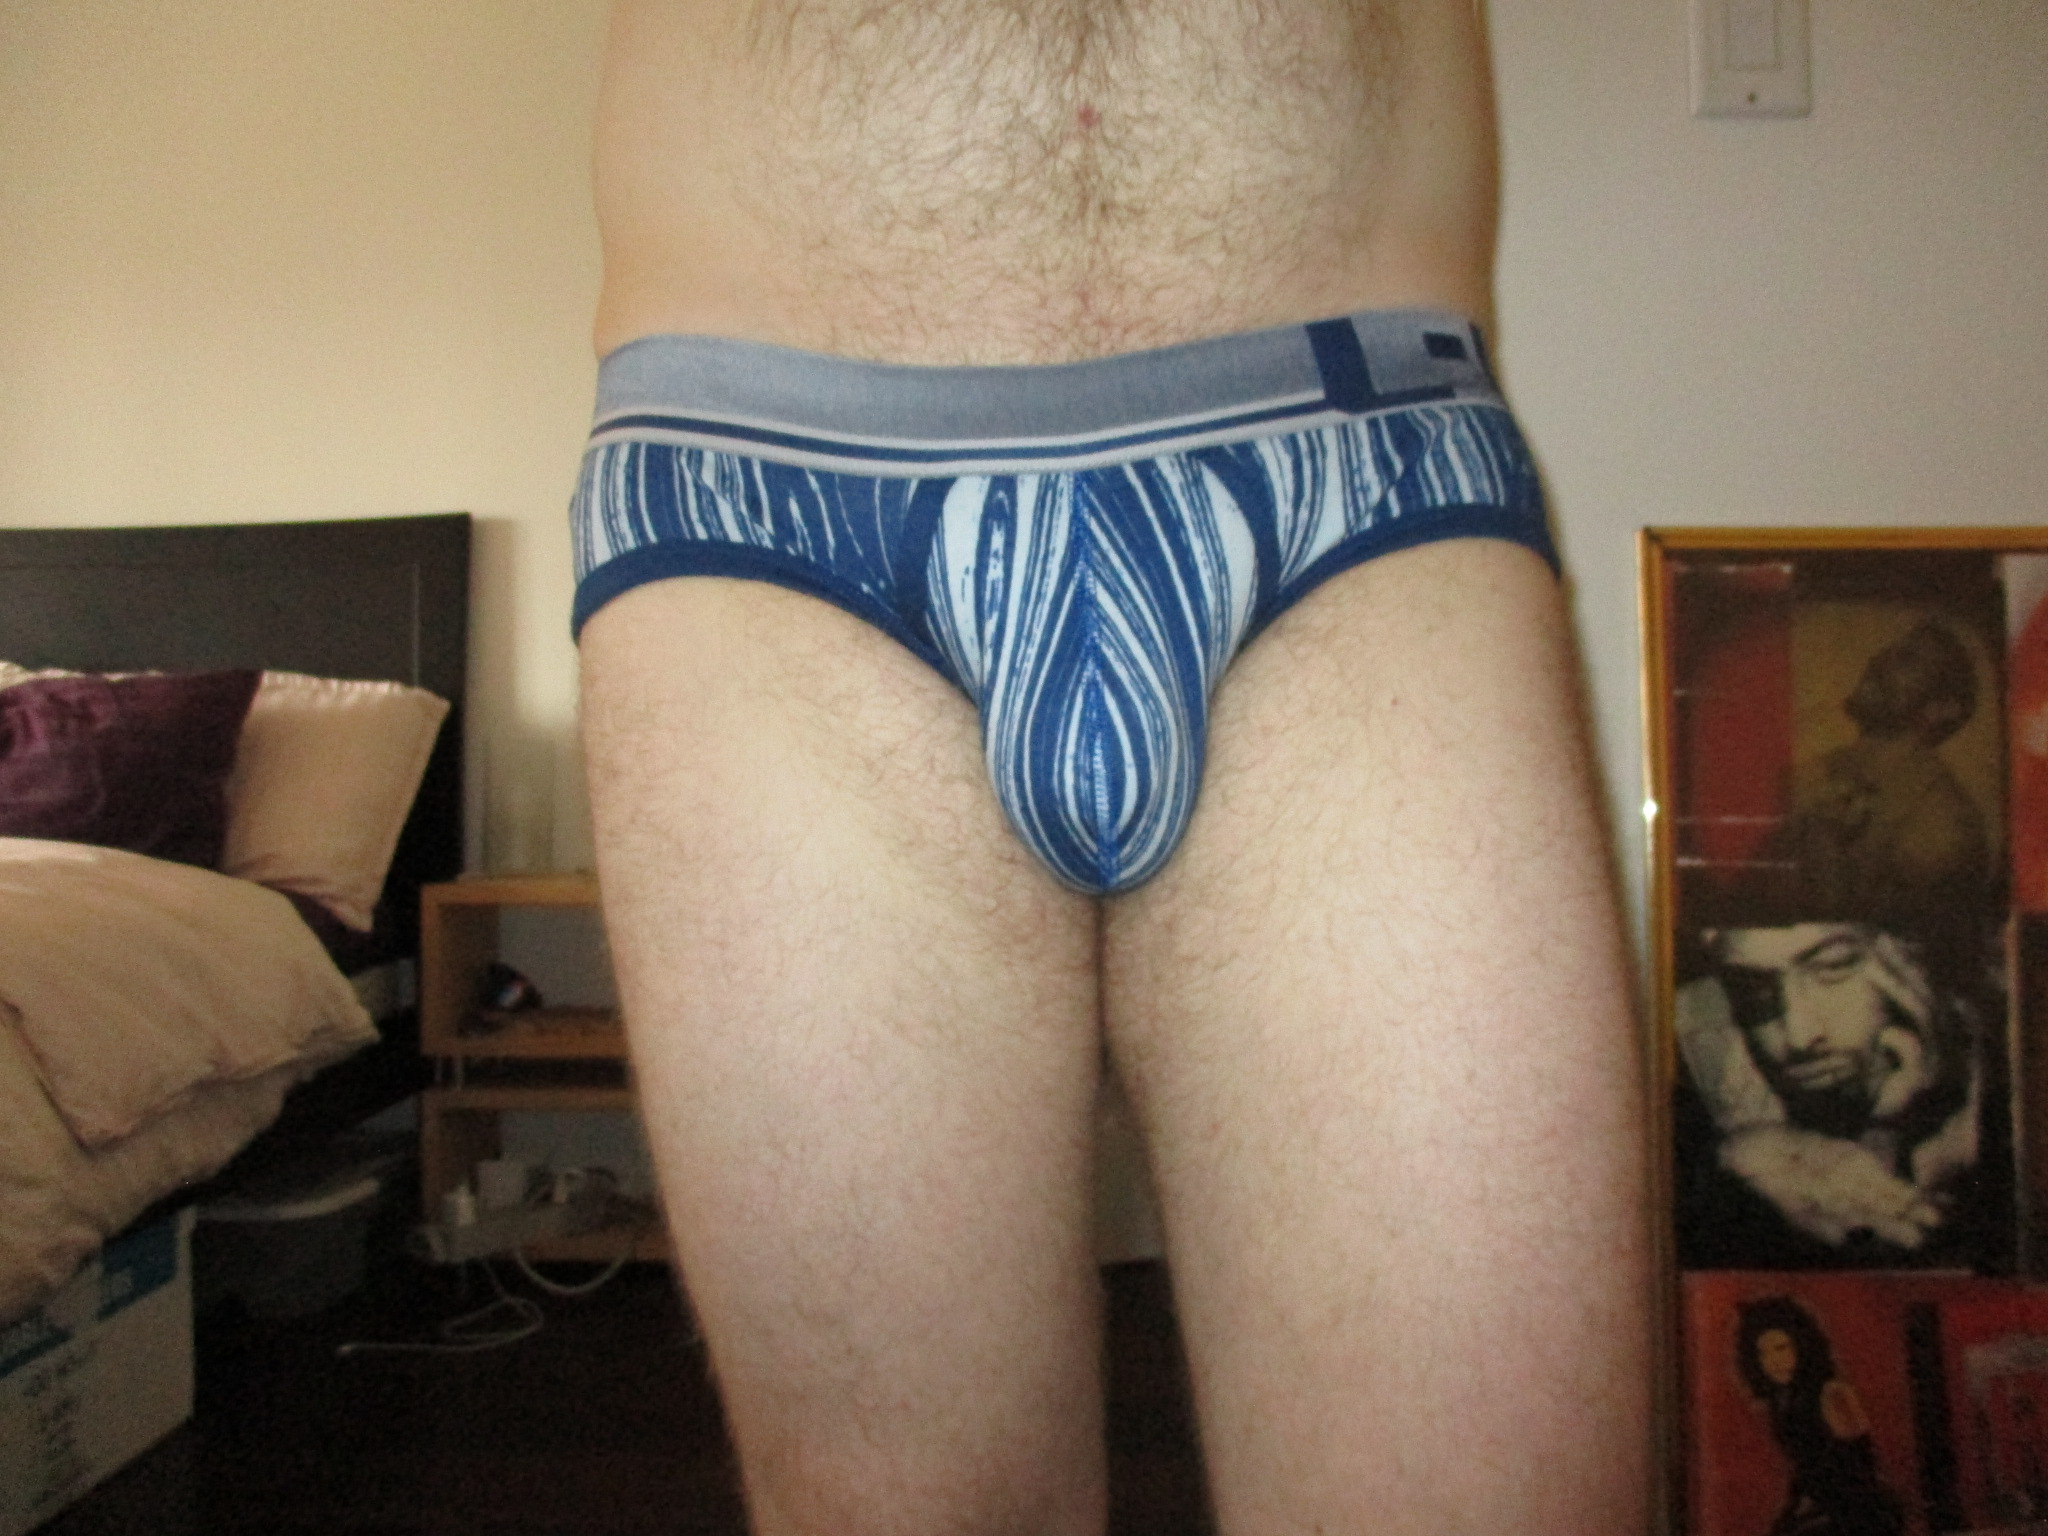 Oxidize low rise briefs from CiN2 today…